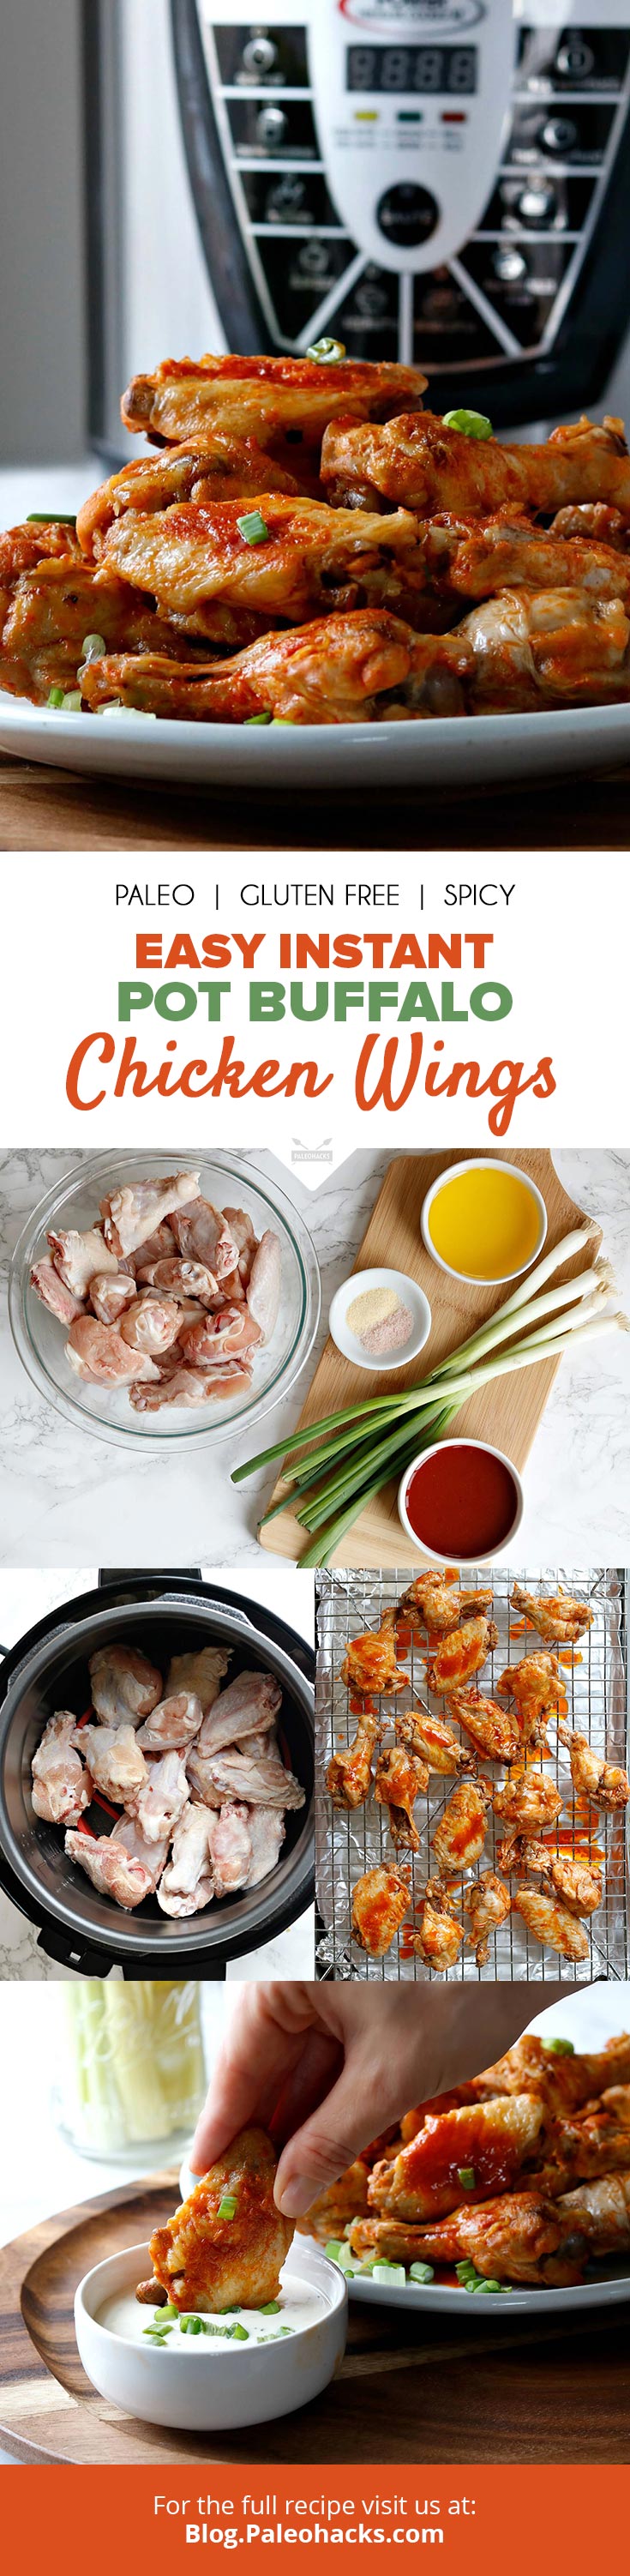 Your Instant Pot and oven work together to create tender Buffalo wings lacquered with saucy, crispy skin. It doesn't get much better than that.